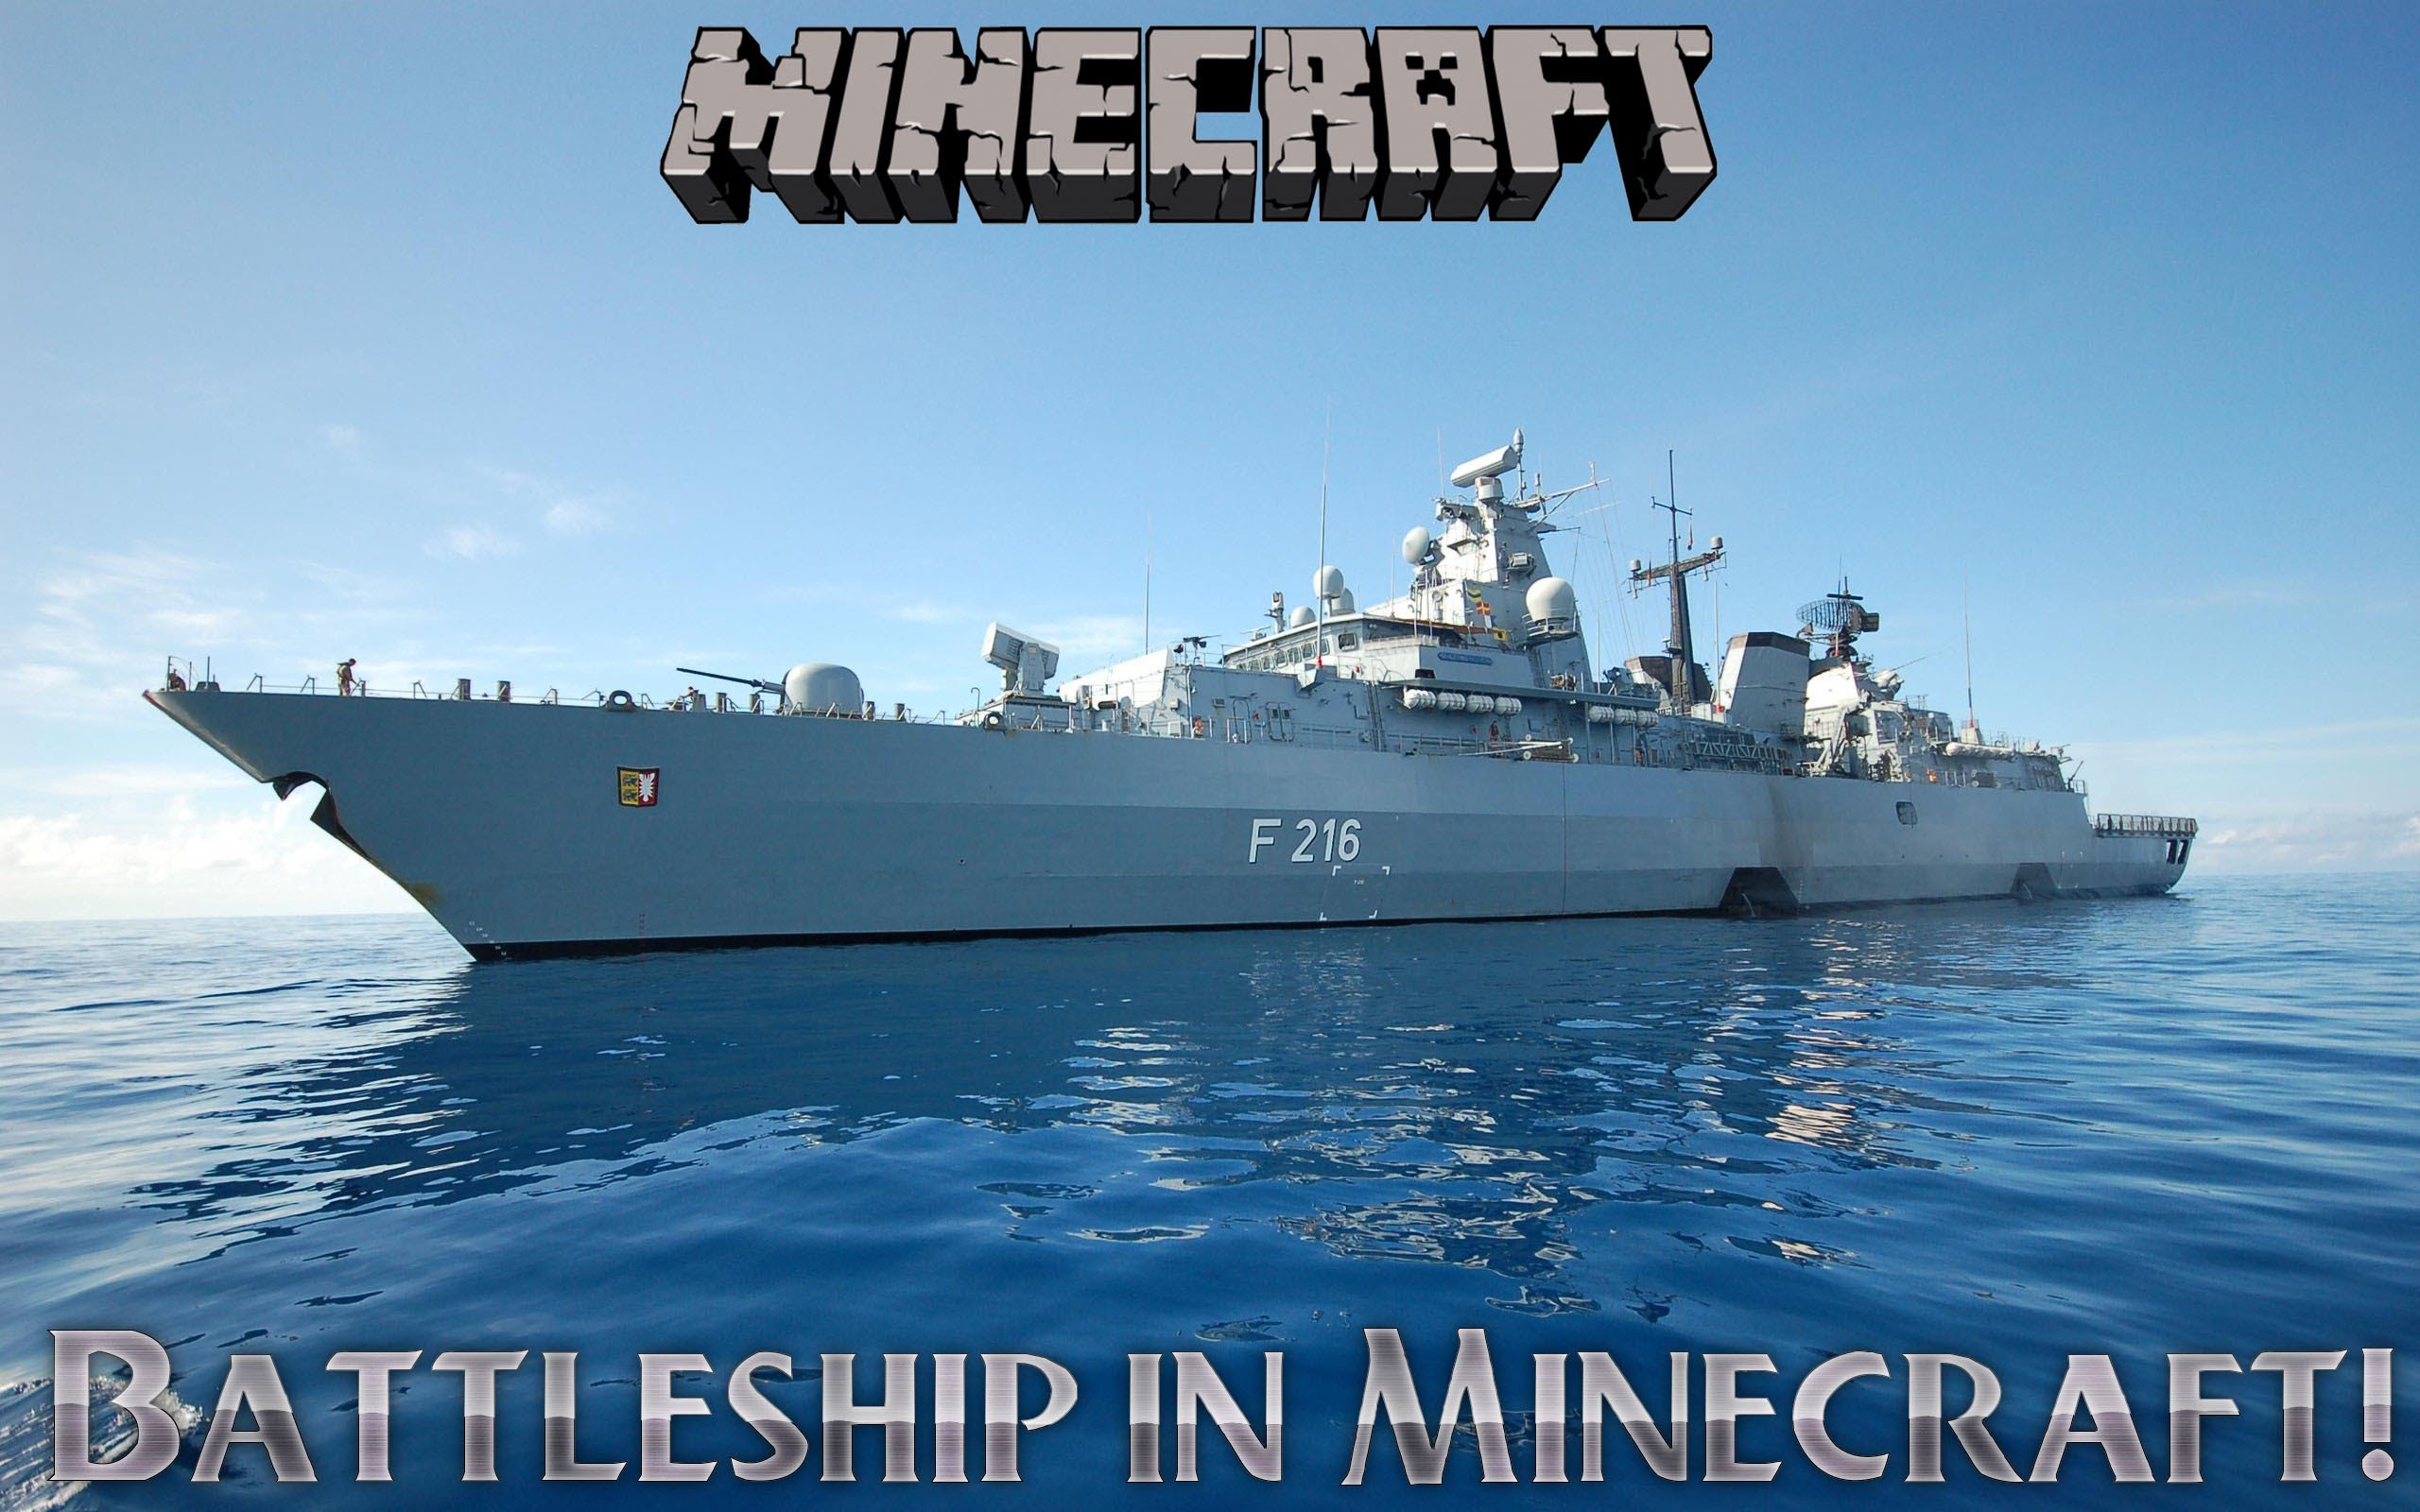 Lets Play Battleship in Minecraft! - YouTube